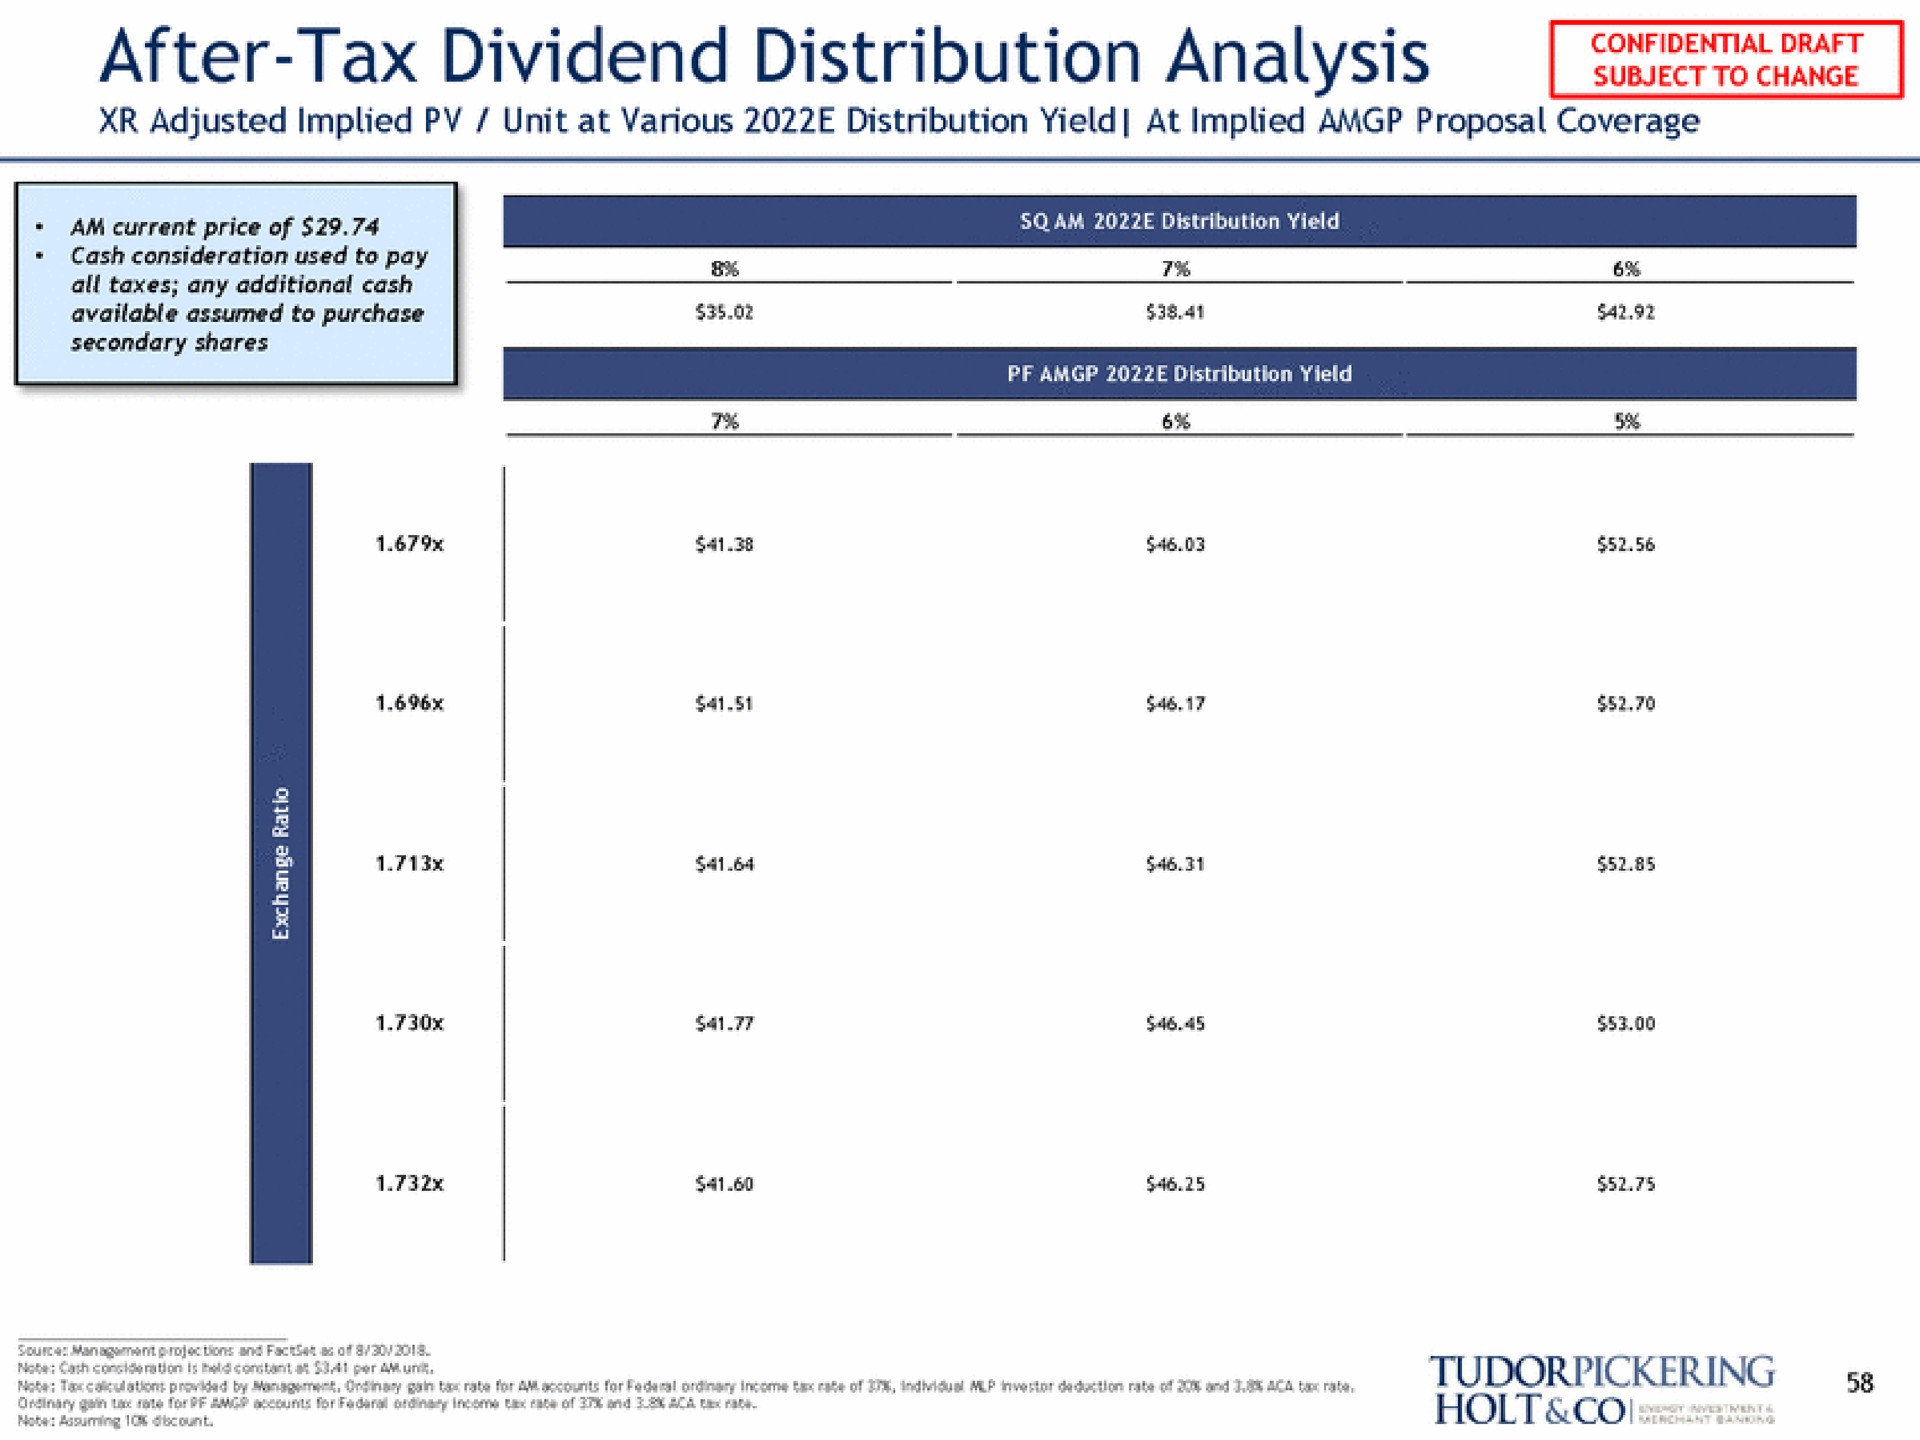 after tax dividend distribution analysis | Tudor, Pickering, Holt & Co